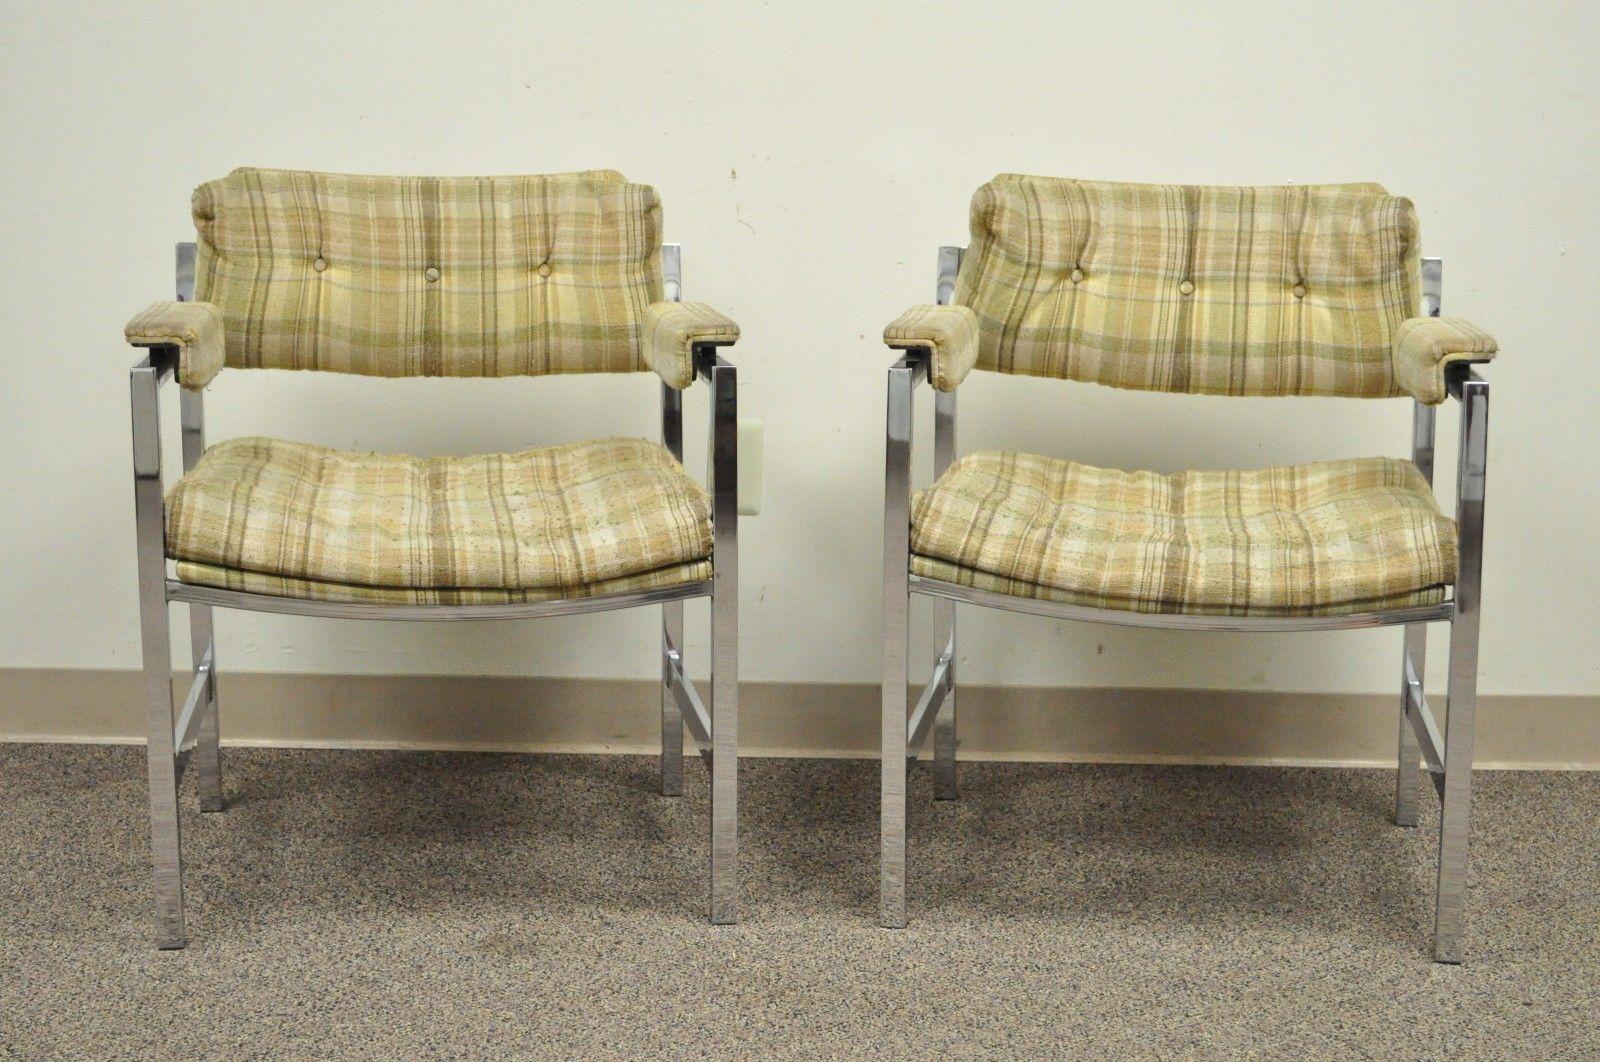 Unique pair of vintage Mid-Century Modern chrome arm chairs. Maker is unknown but the style and quality is very similar to Milo Baughman. Item details square chrome frames, floating form armrests with raised walnut underside, and clean modernist